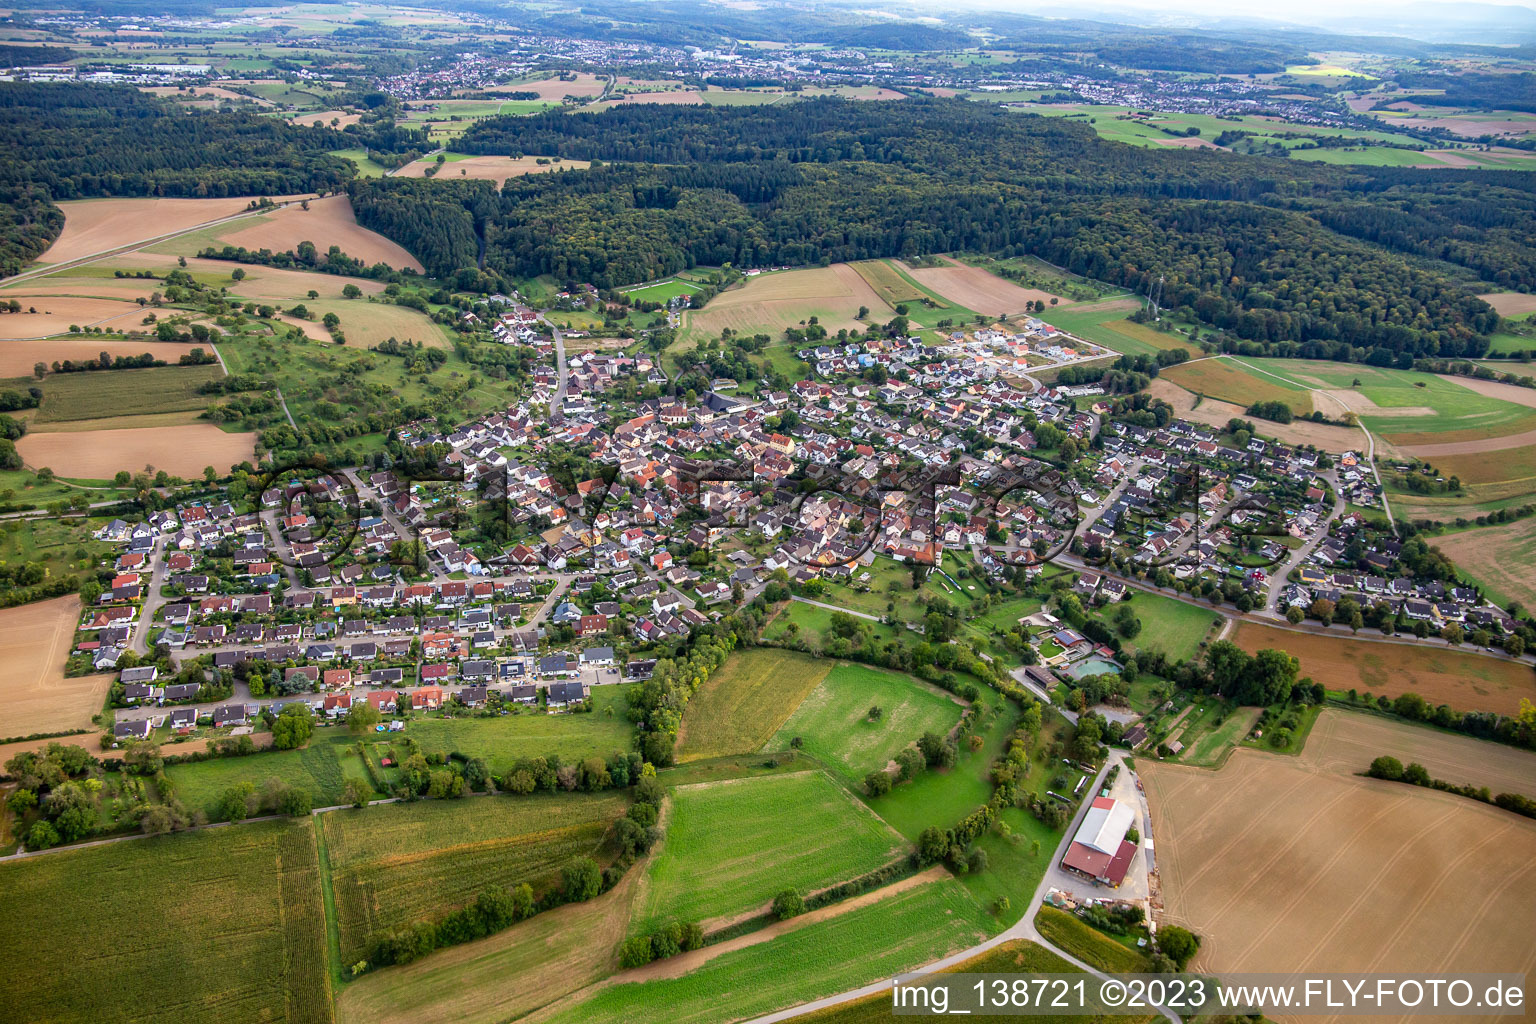 From the north in the district Büchig in Bretten in the state Baden-Wuerttemberg, Germany